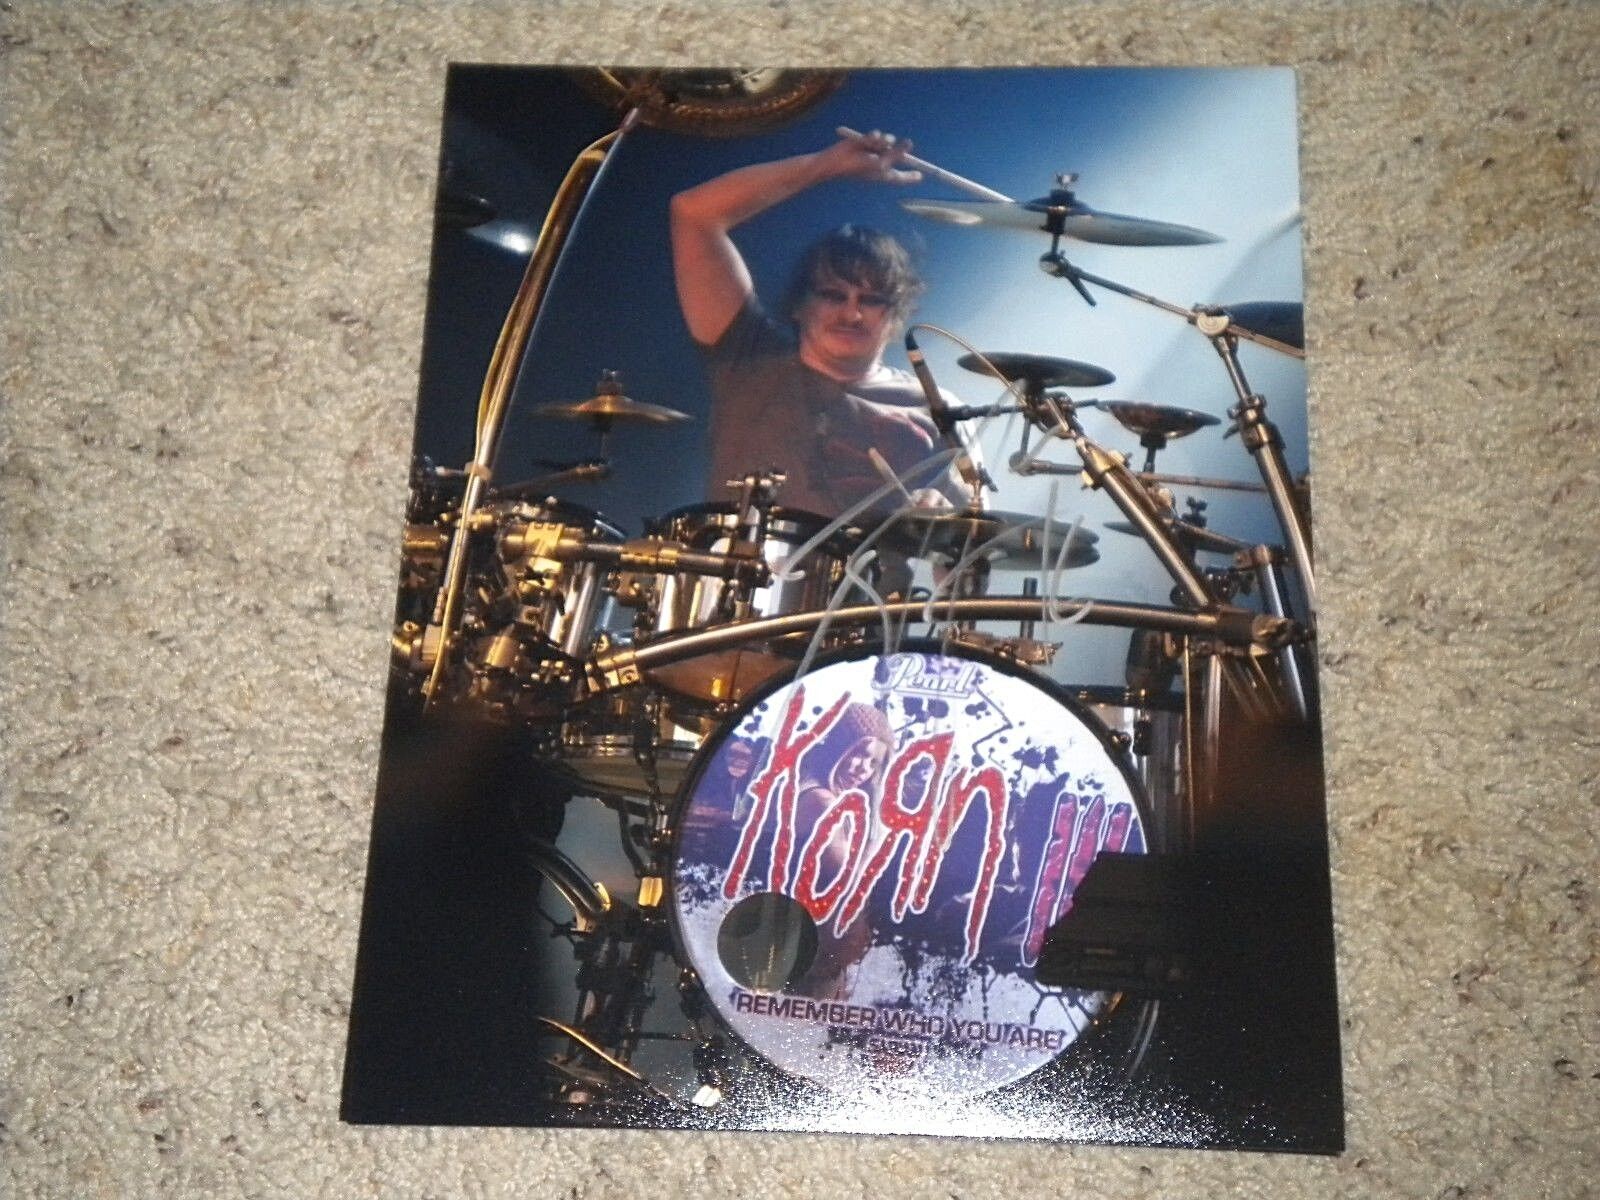 Korn drummer ray luzier signed x photo coa